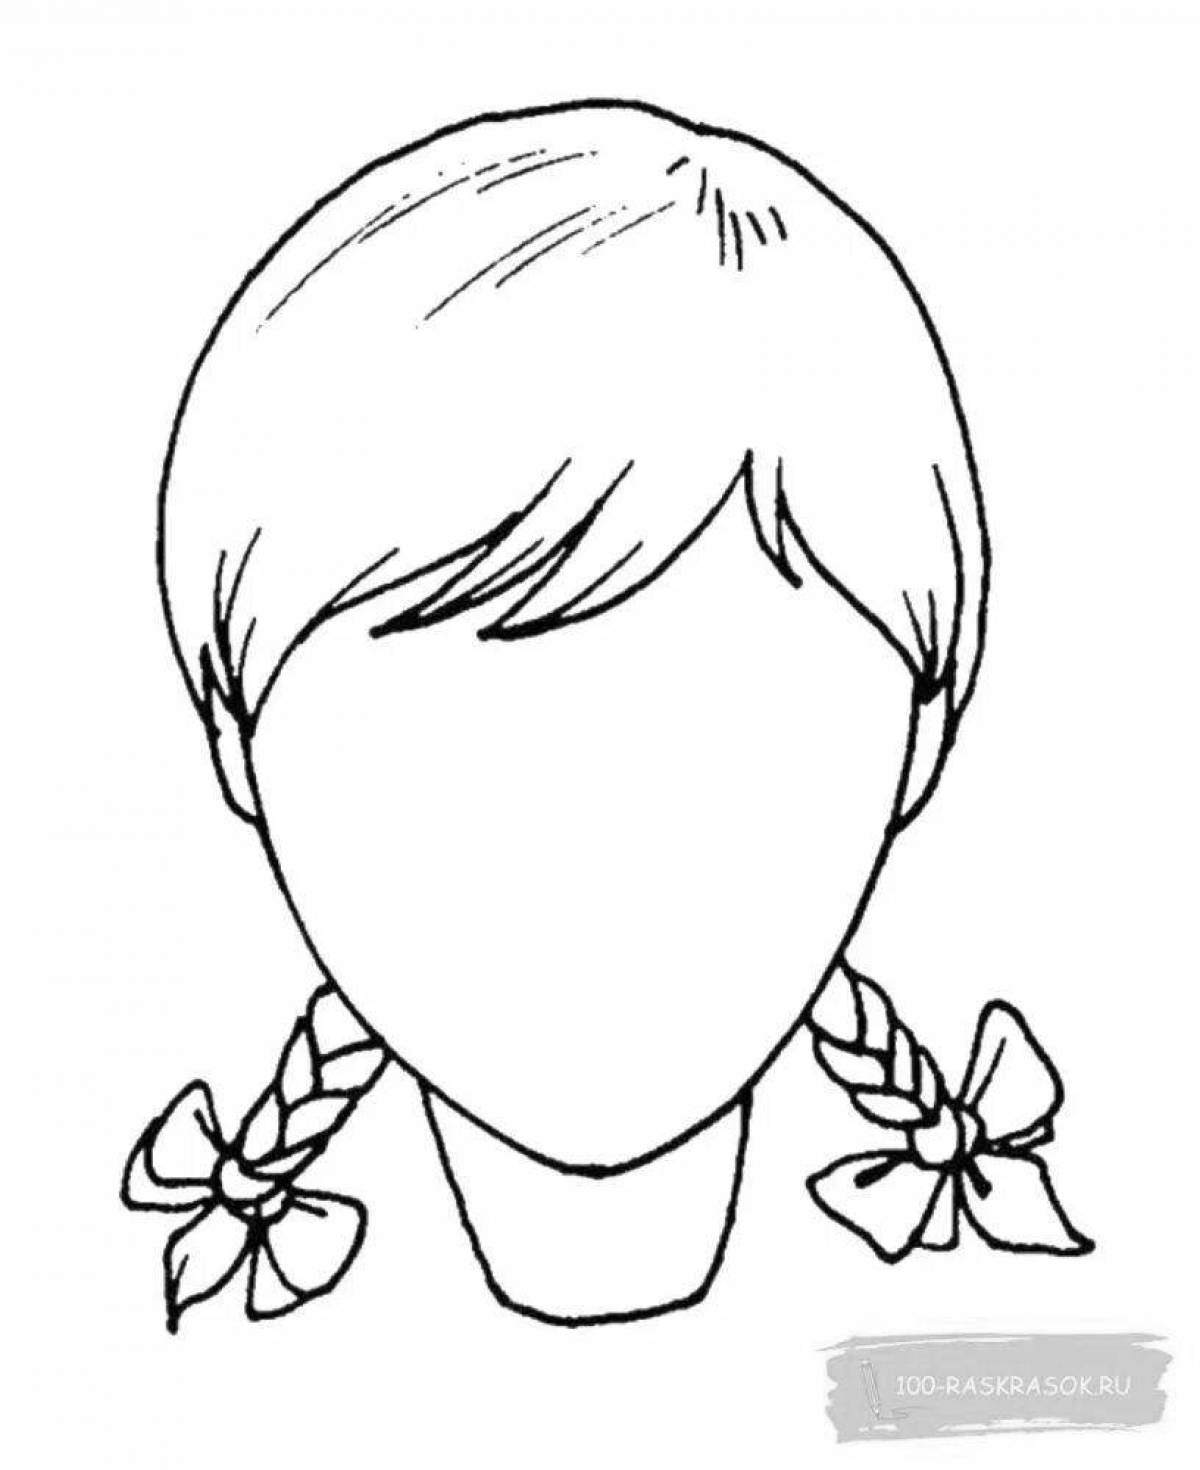 Incredible Mom Portrait Coloring Page for 6-7 year olds